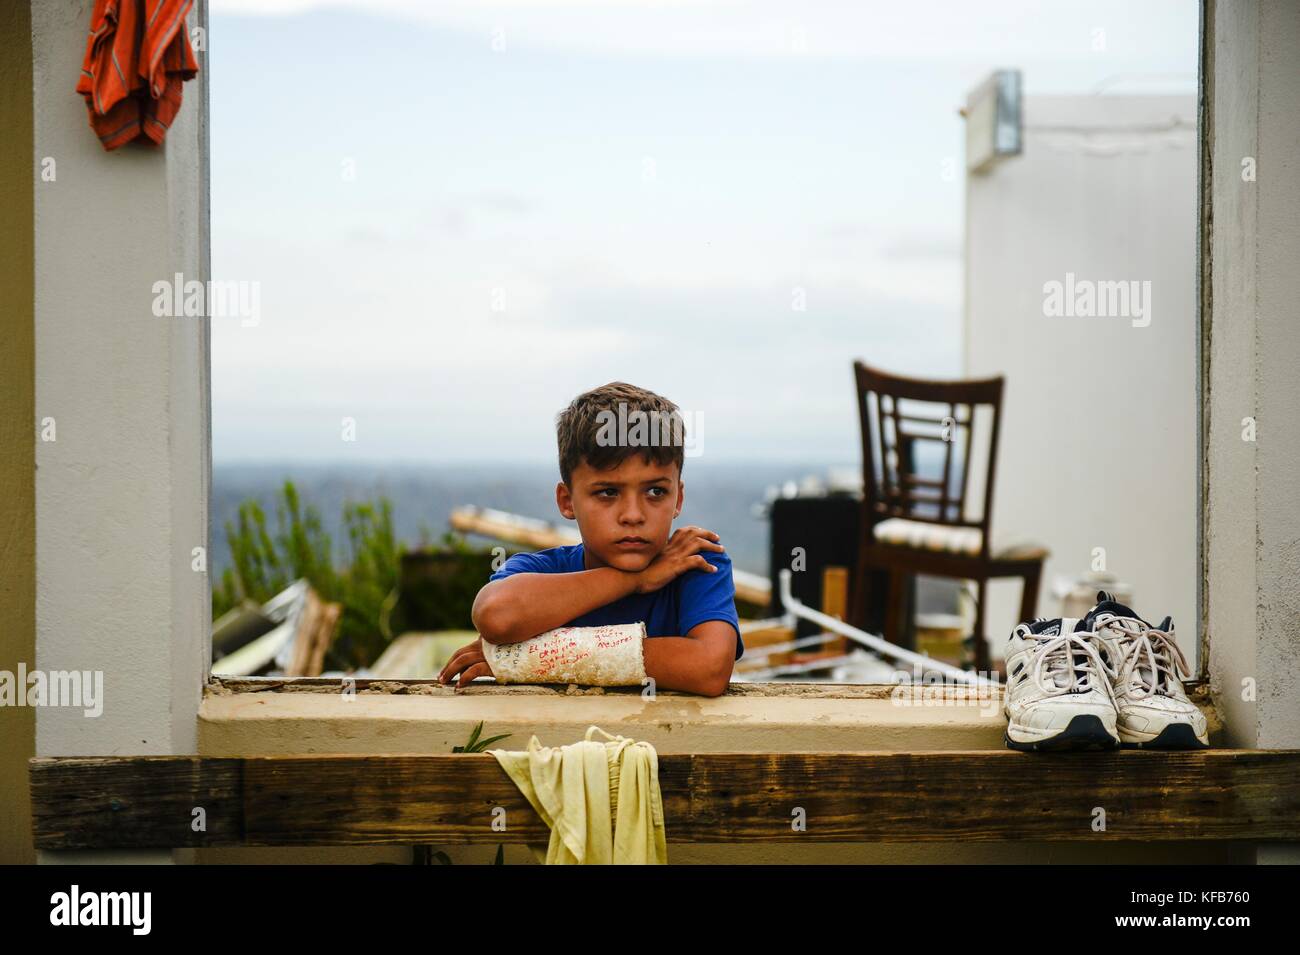 A child stands in the window of a destroyed home in the aftermath of Hurricane Maria October 12, 2017 in Utuado, Puerto Rico.   (photo by Joshua L. DeMotts via Planetpix) Stock Photo